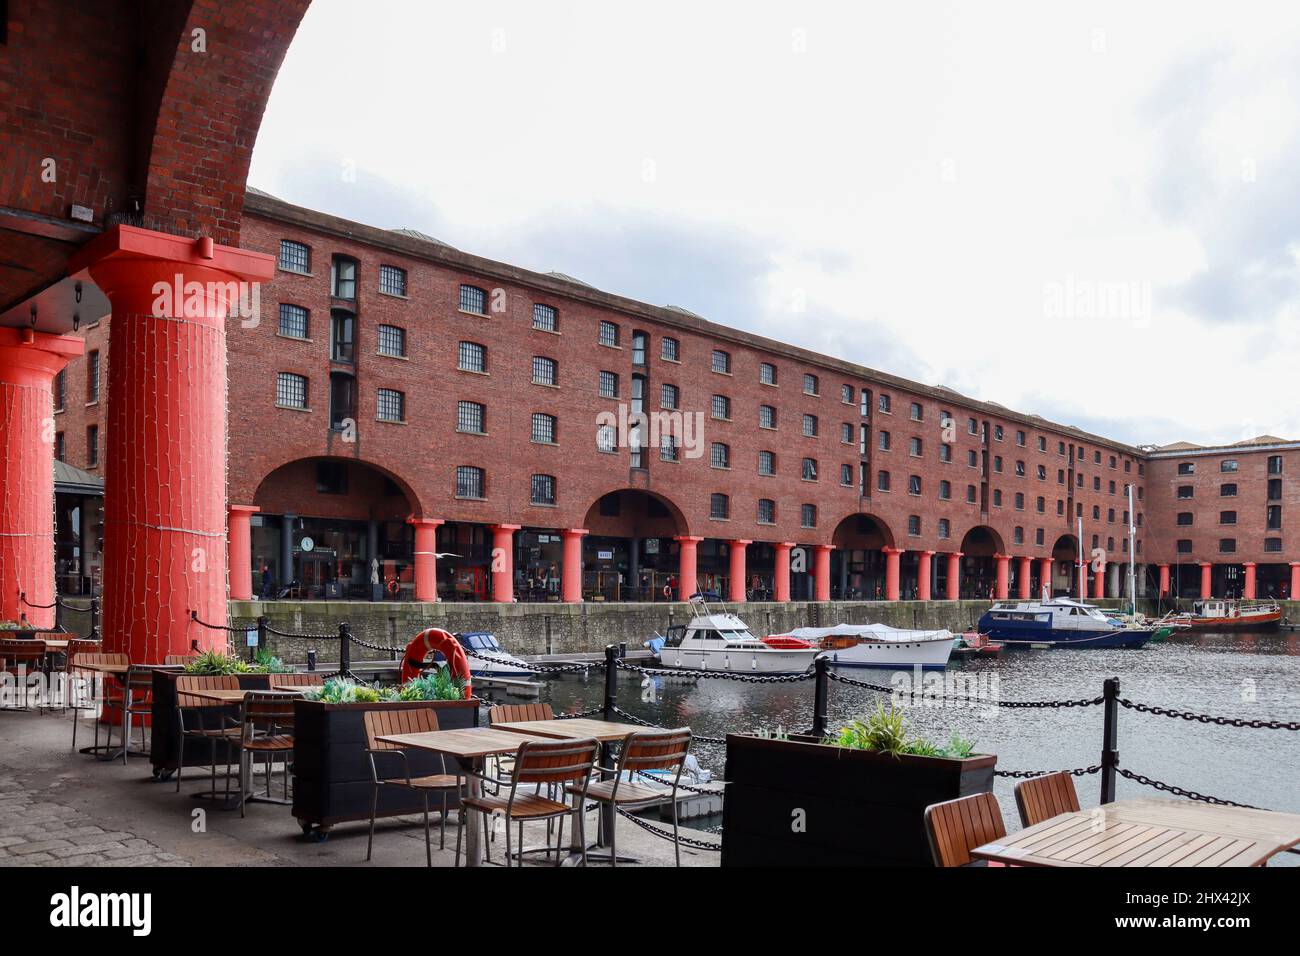 Outdoor seating at the Royal Albert Dock, Liverpool Stock Photo